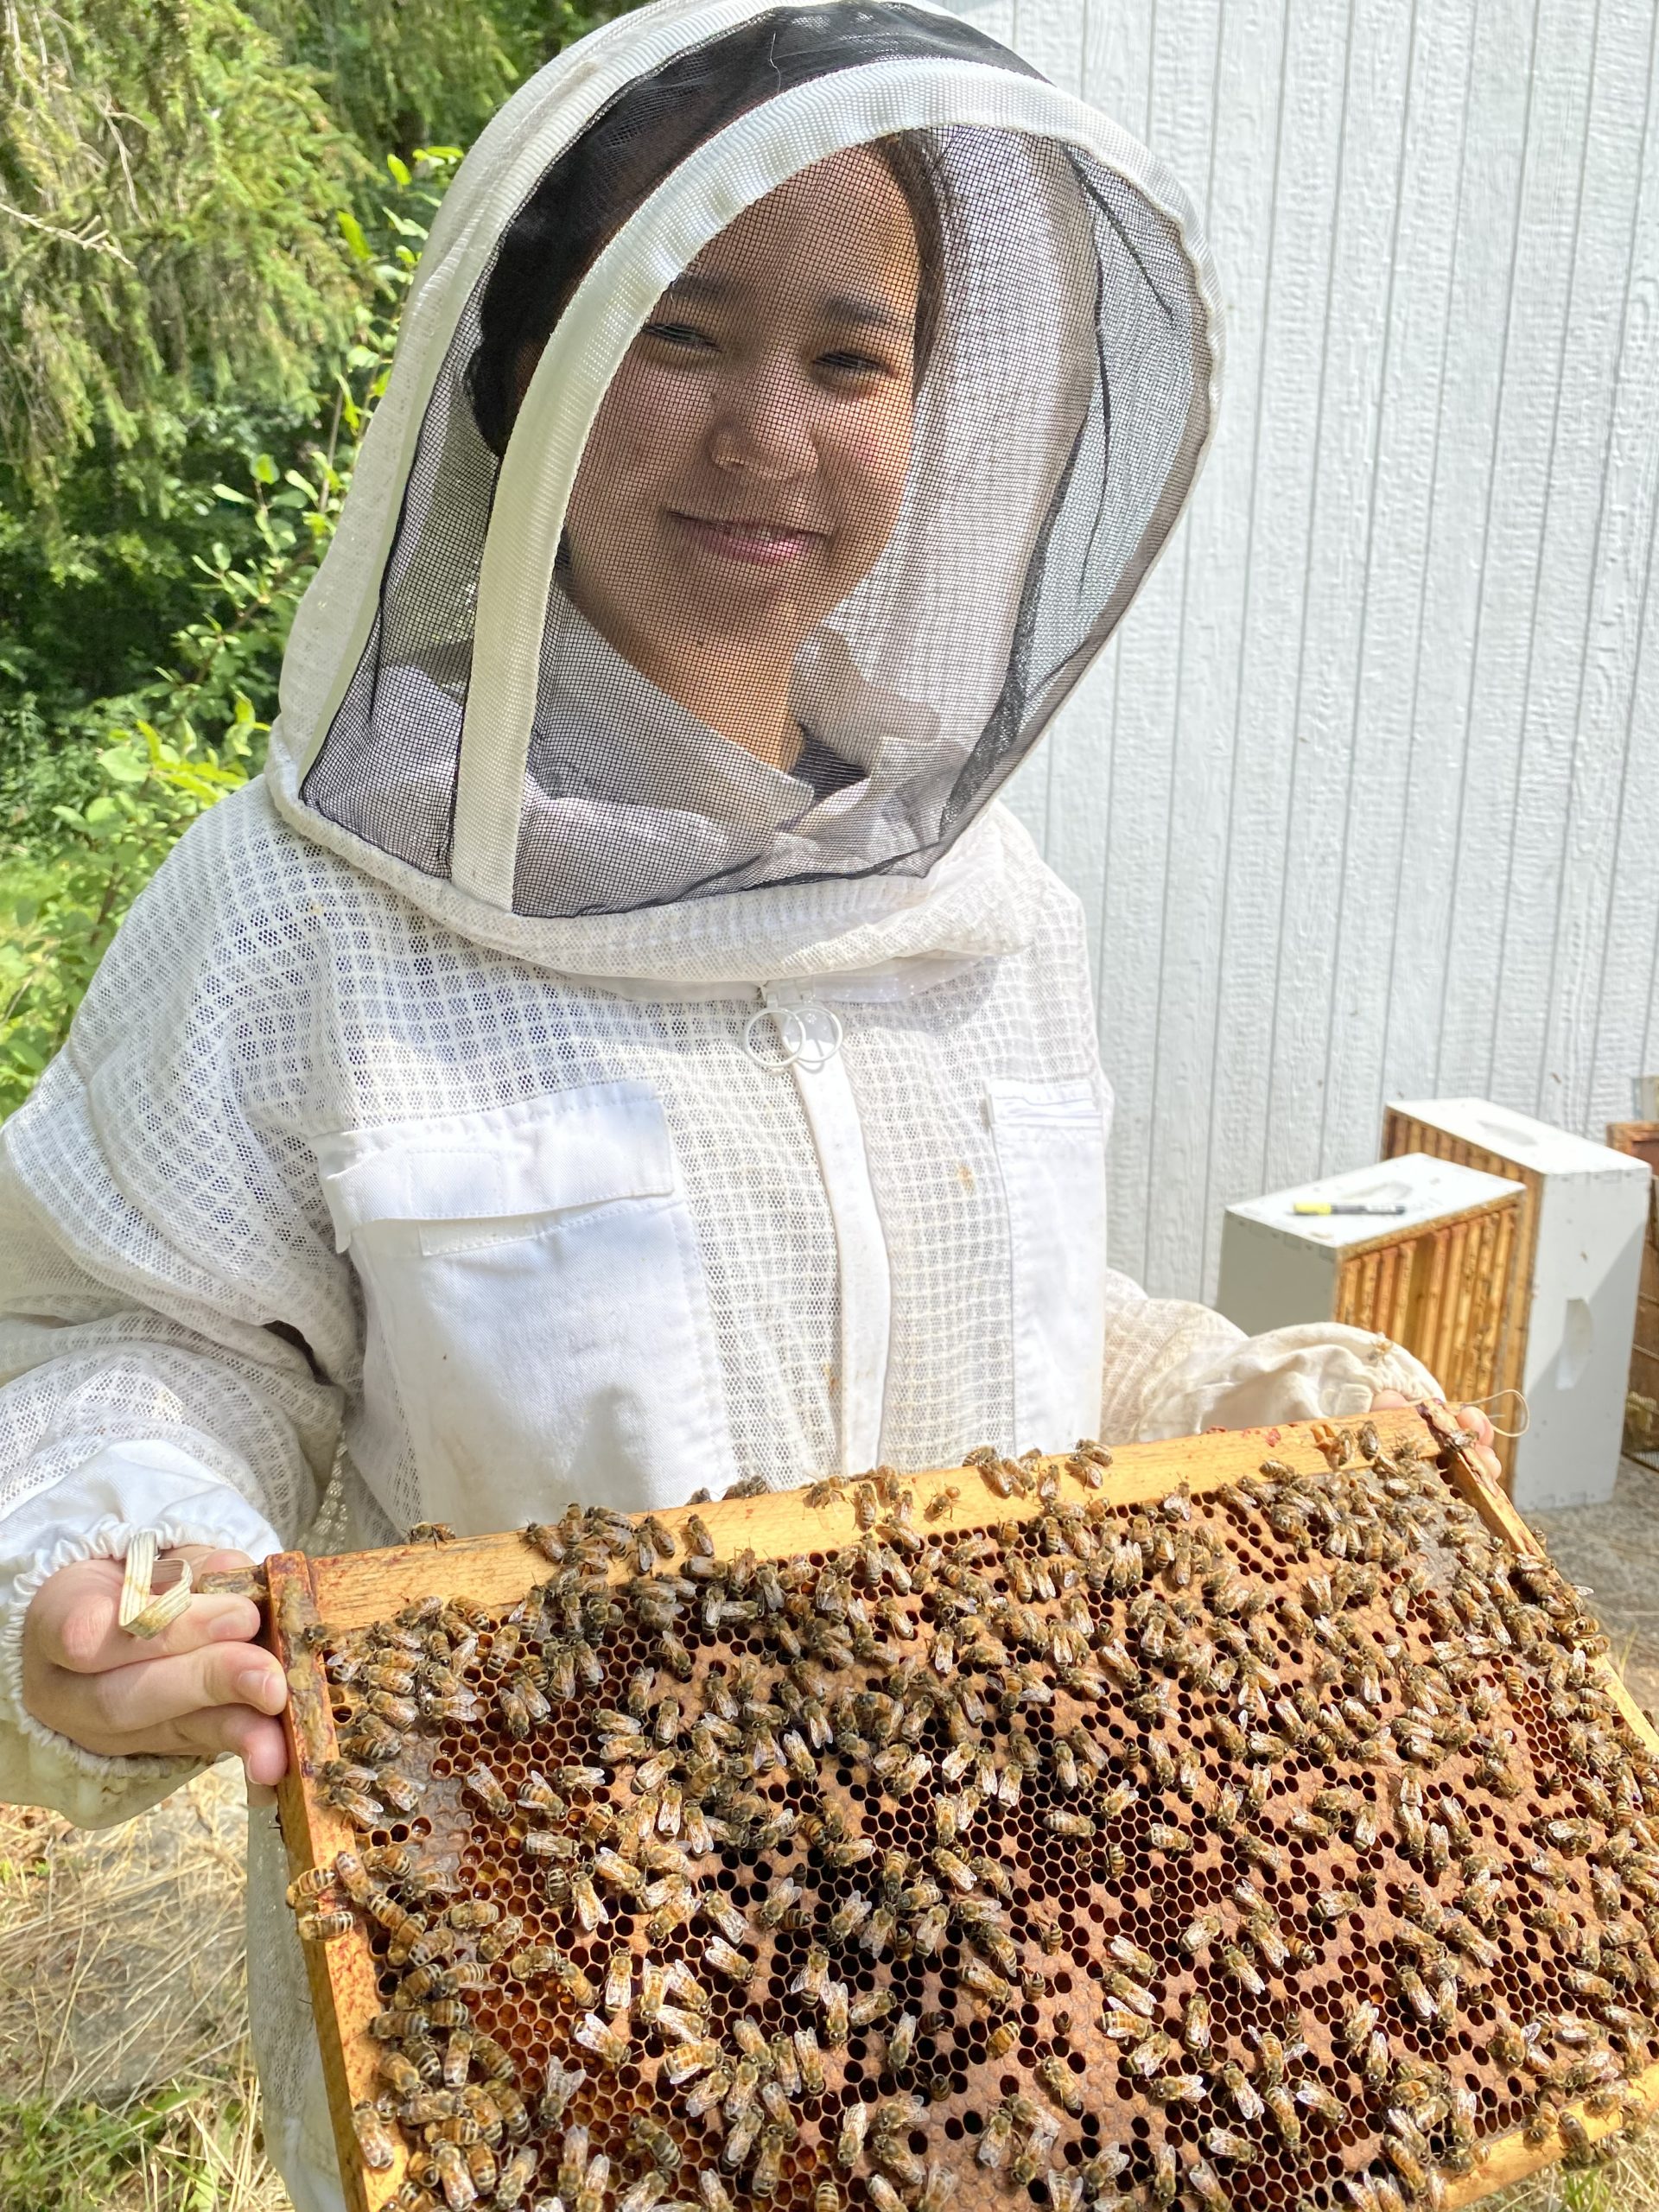 Student in bee suit holding an frame from a beehive with live bees.